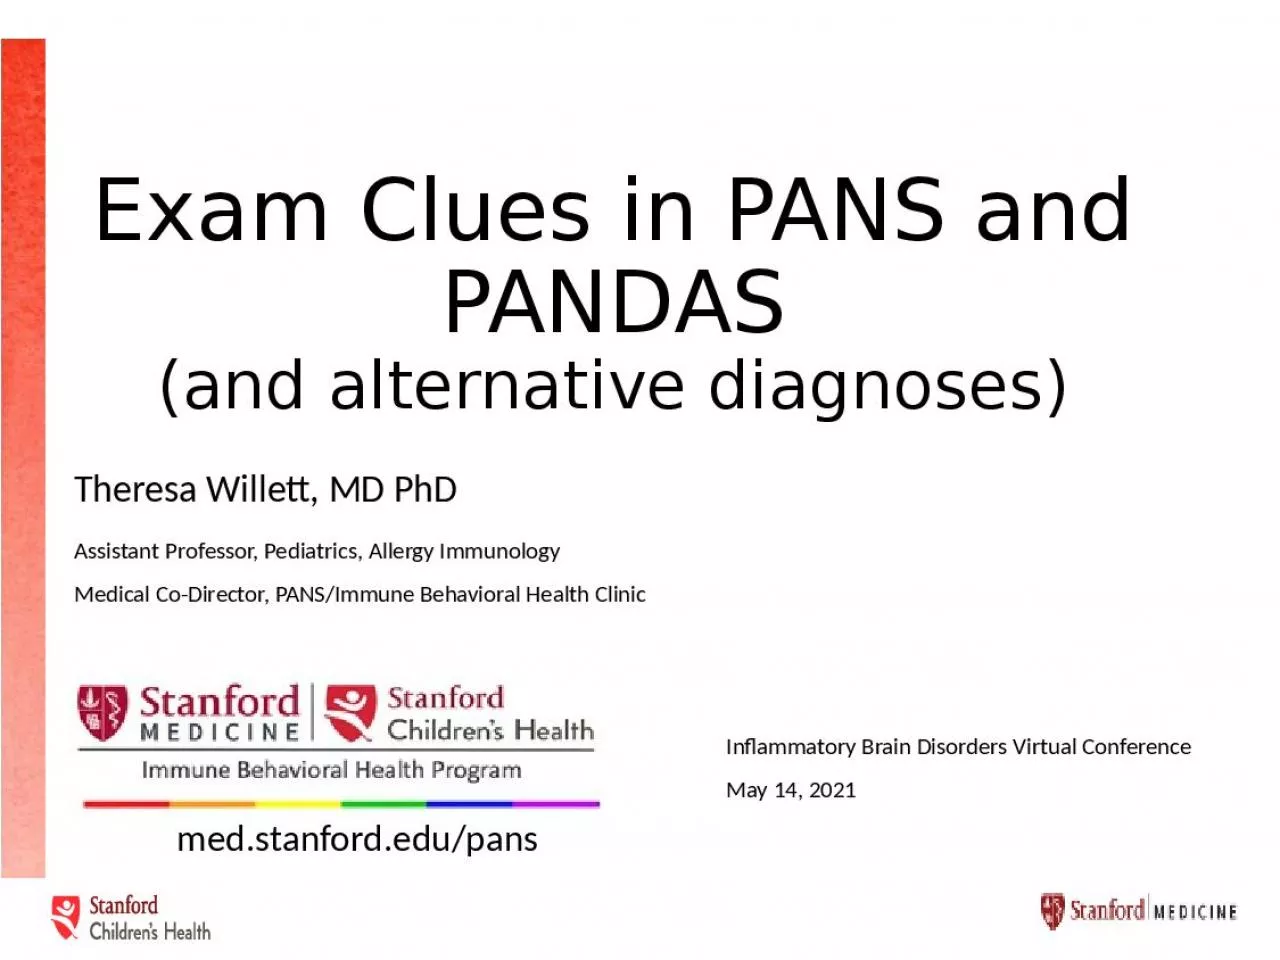 Exam Clues in PANS and PANDAS